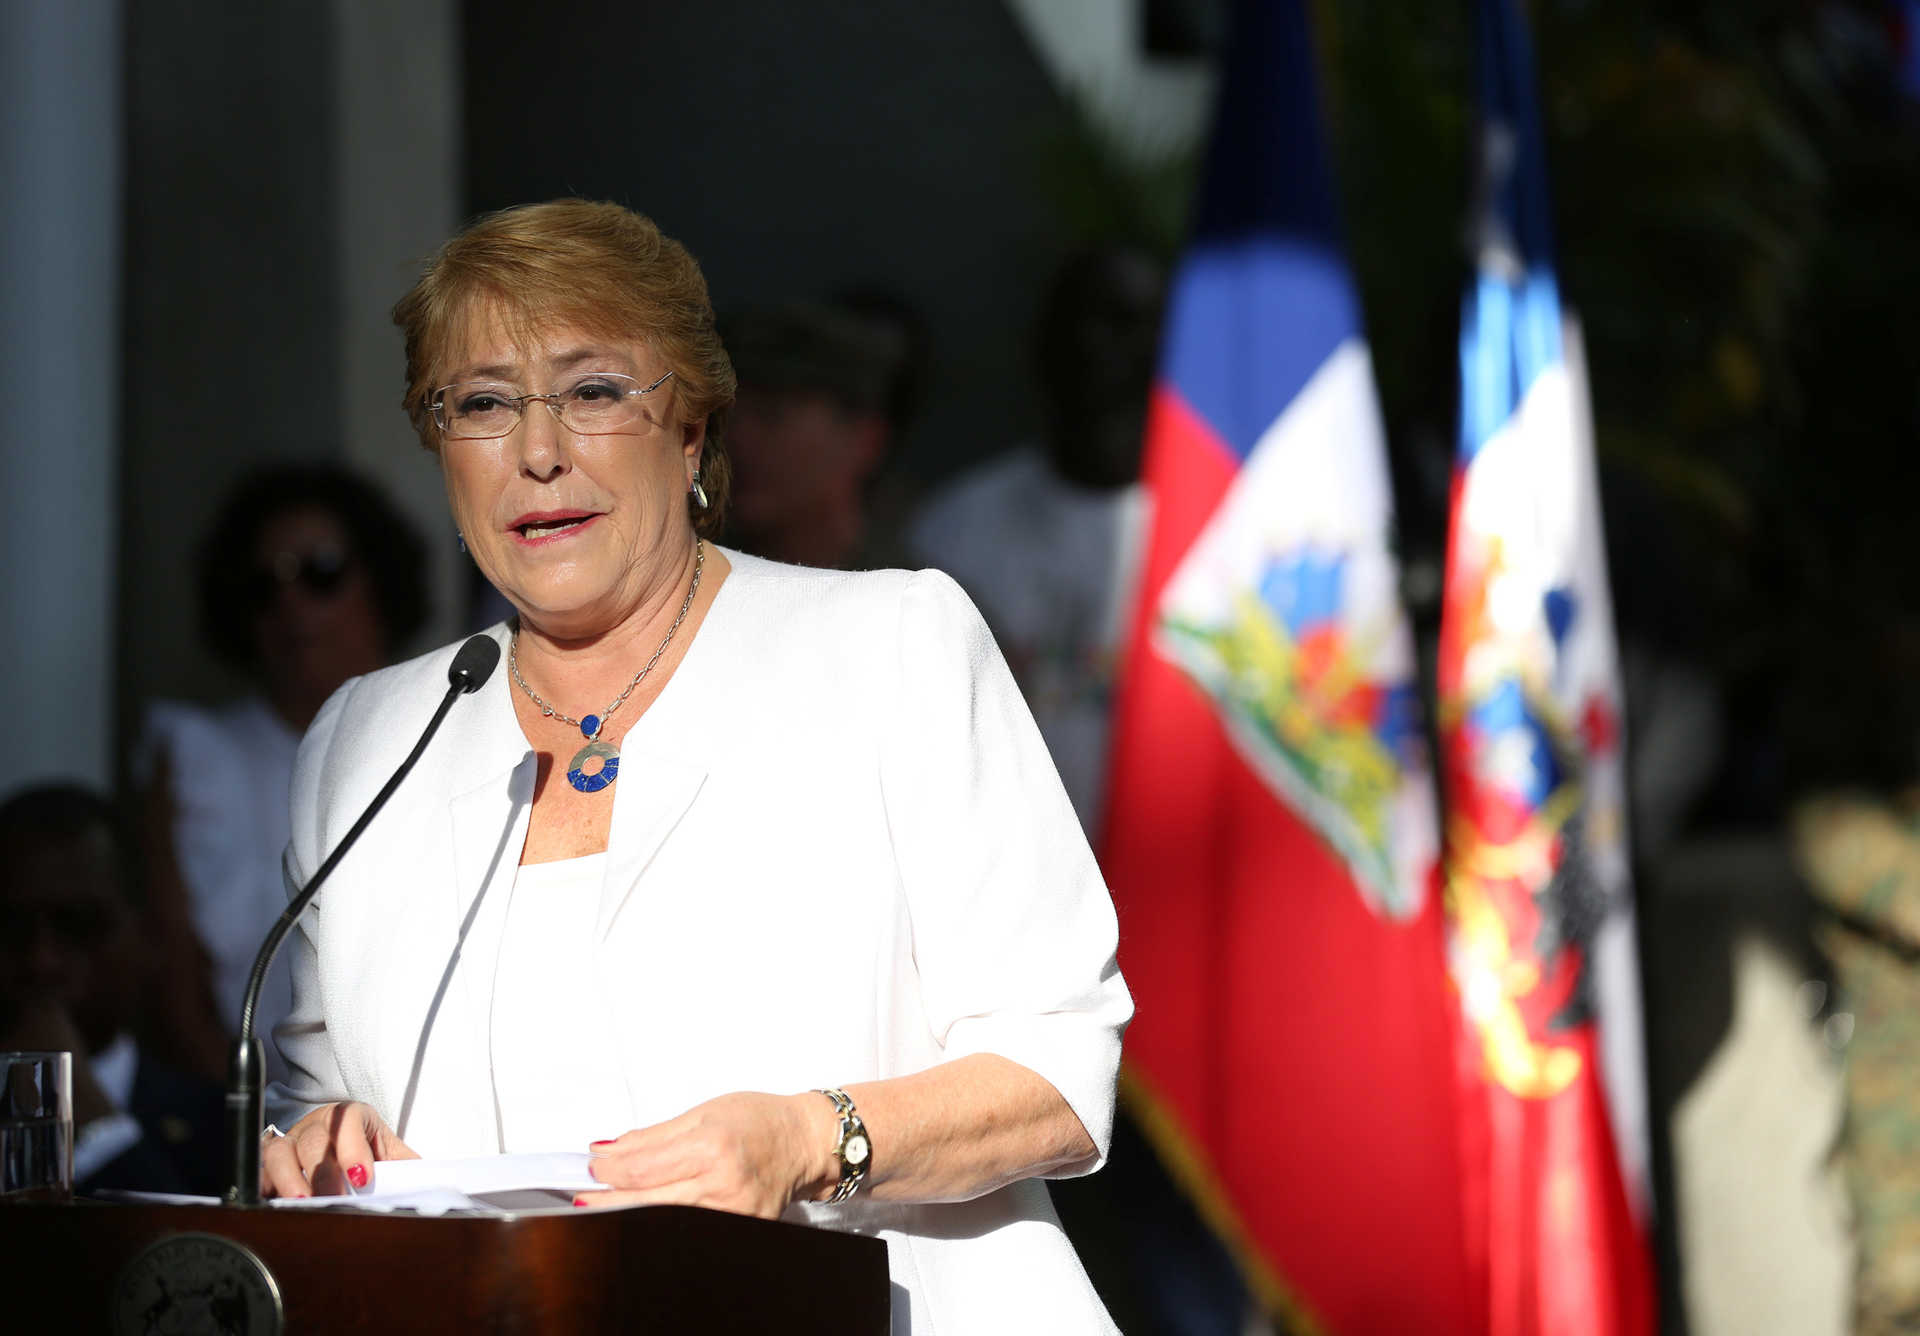 Chile's President Michelle Bachelet addresses the audience during a visit to the Ecole Nationale Republique du Chili in Port-au-Prince